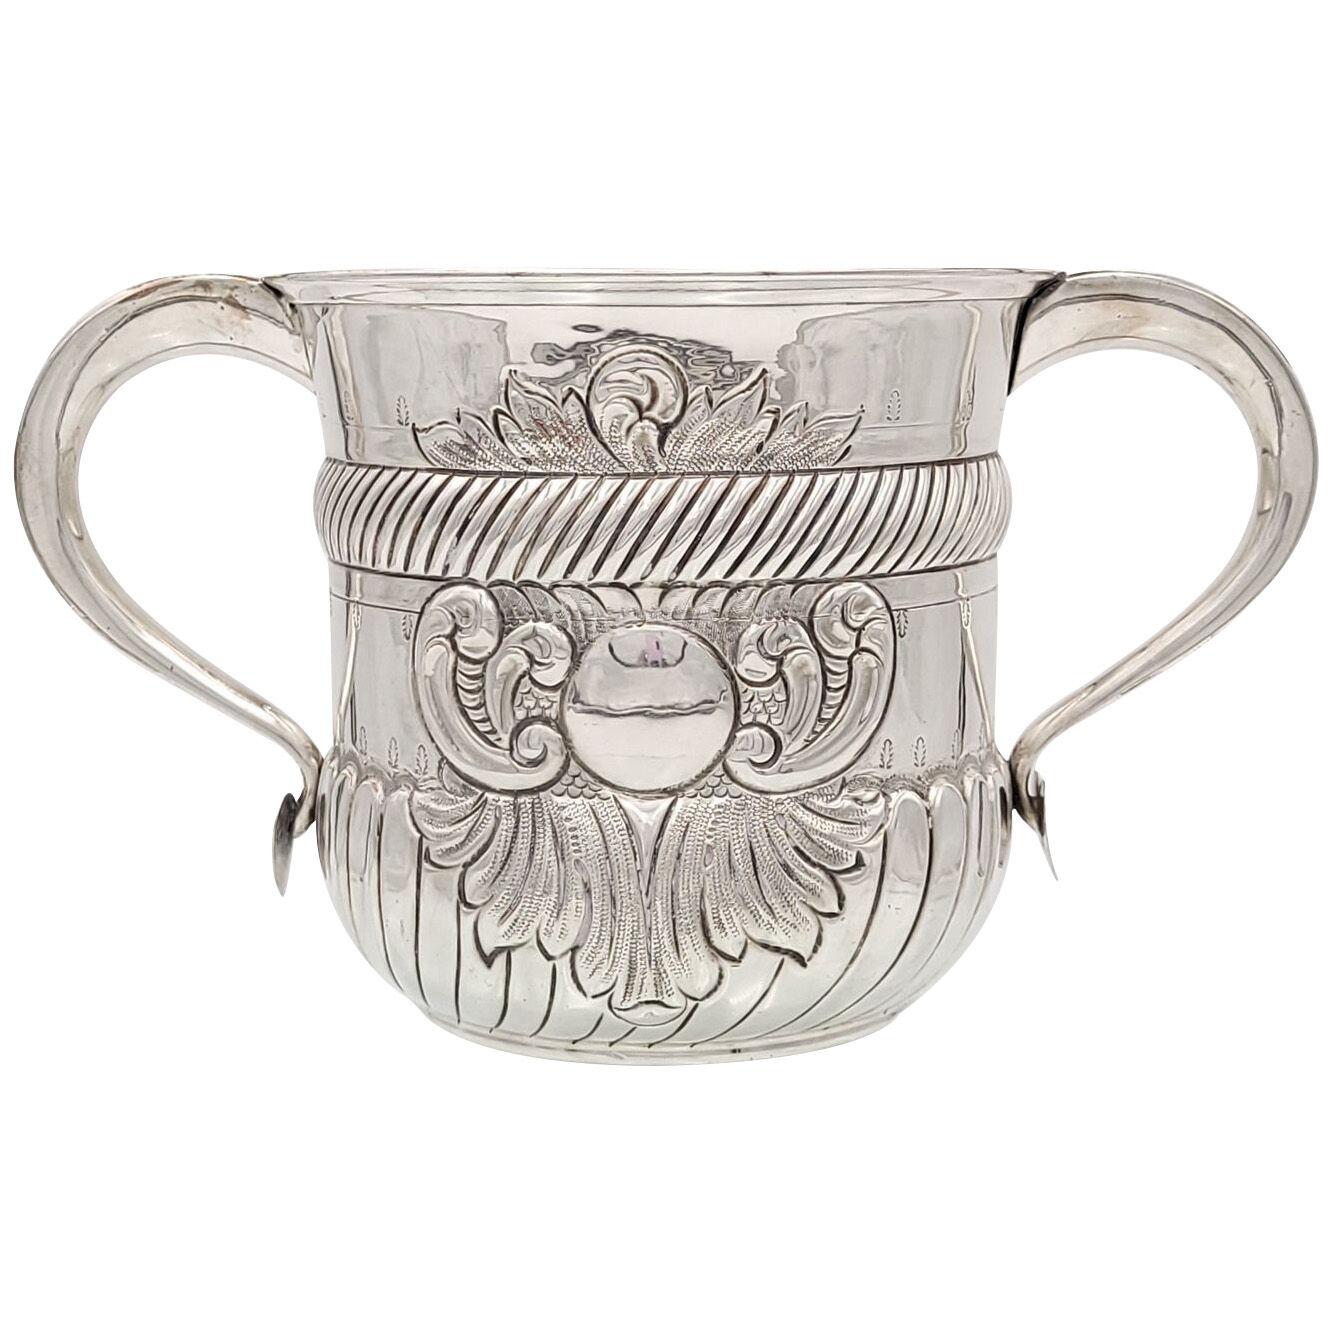 Large Silver on Copper Loving Cup or Marriage Cup, Ireland, Early 19th Century